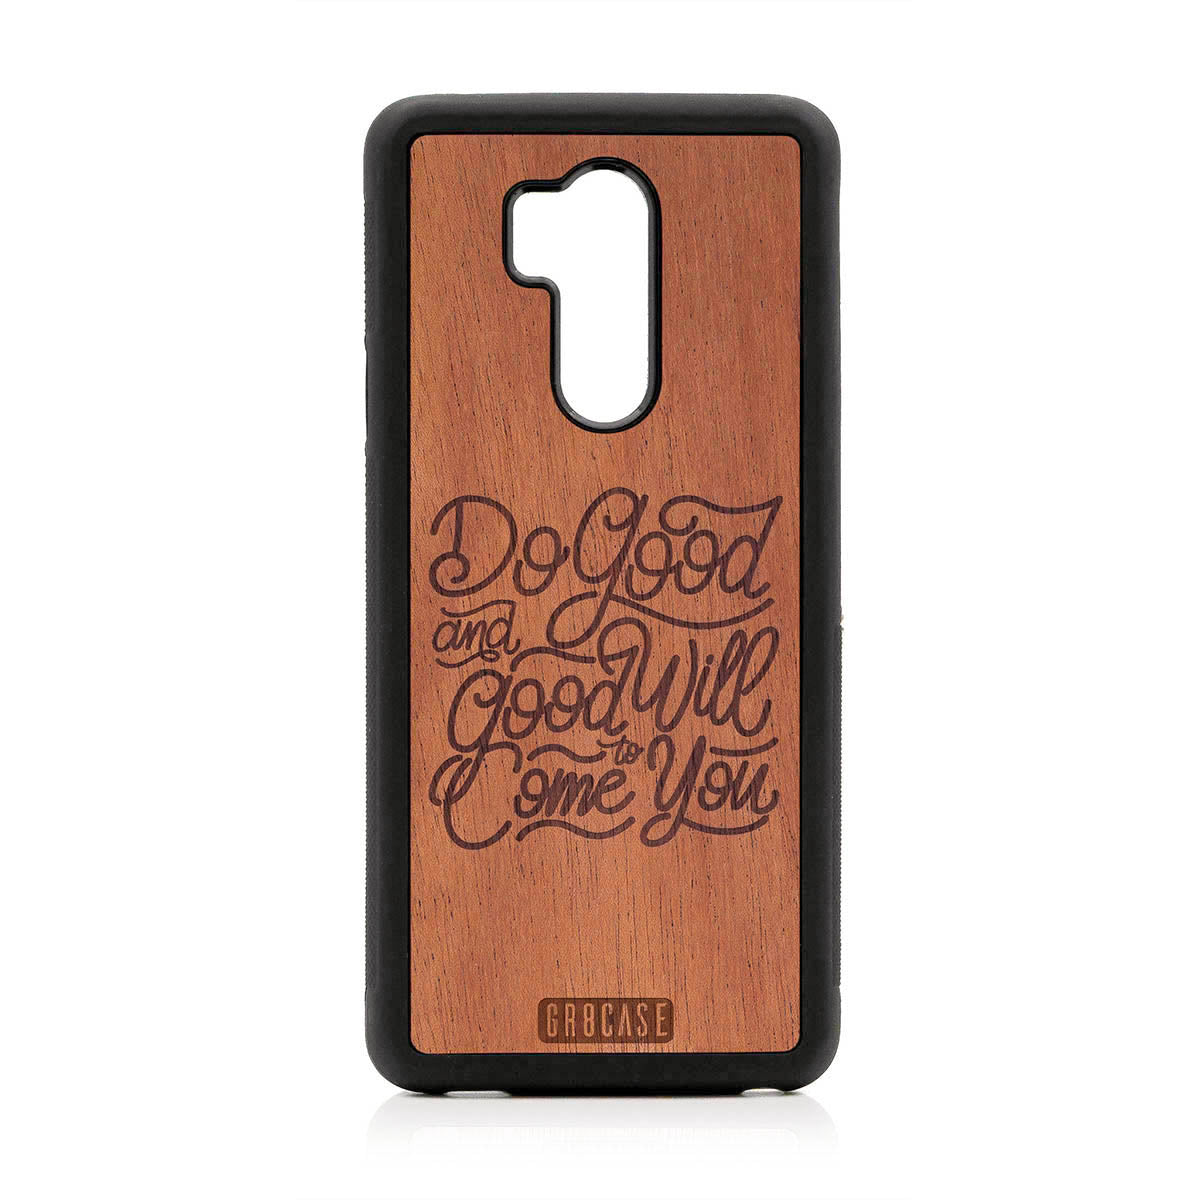 Do Good And Good Will Come To You Design Wood Case For LG G7 ThinQ by GR8CASE